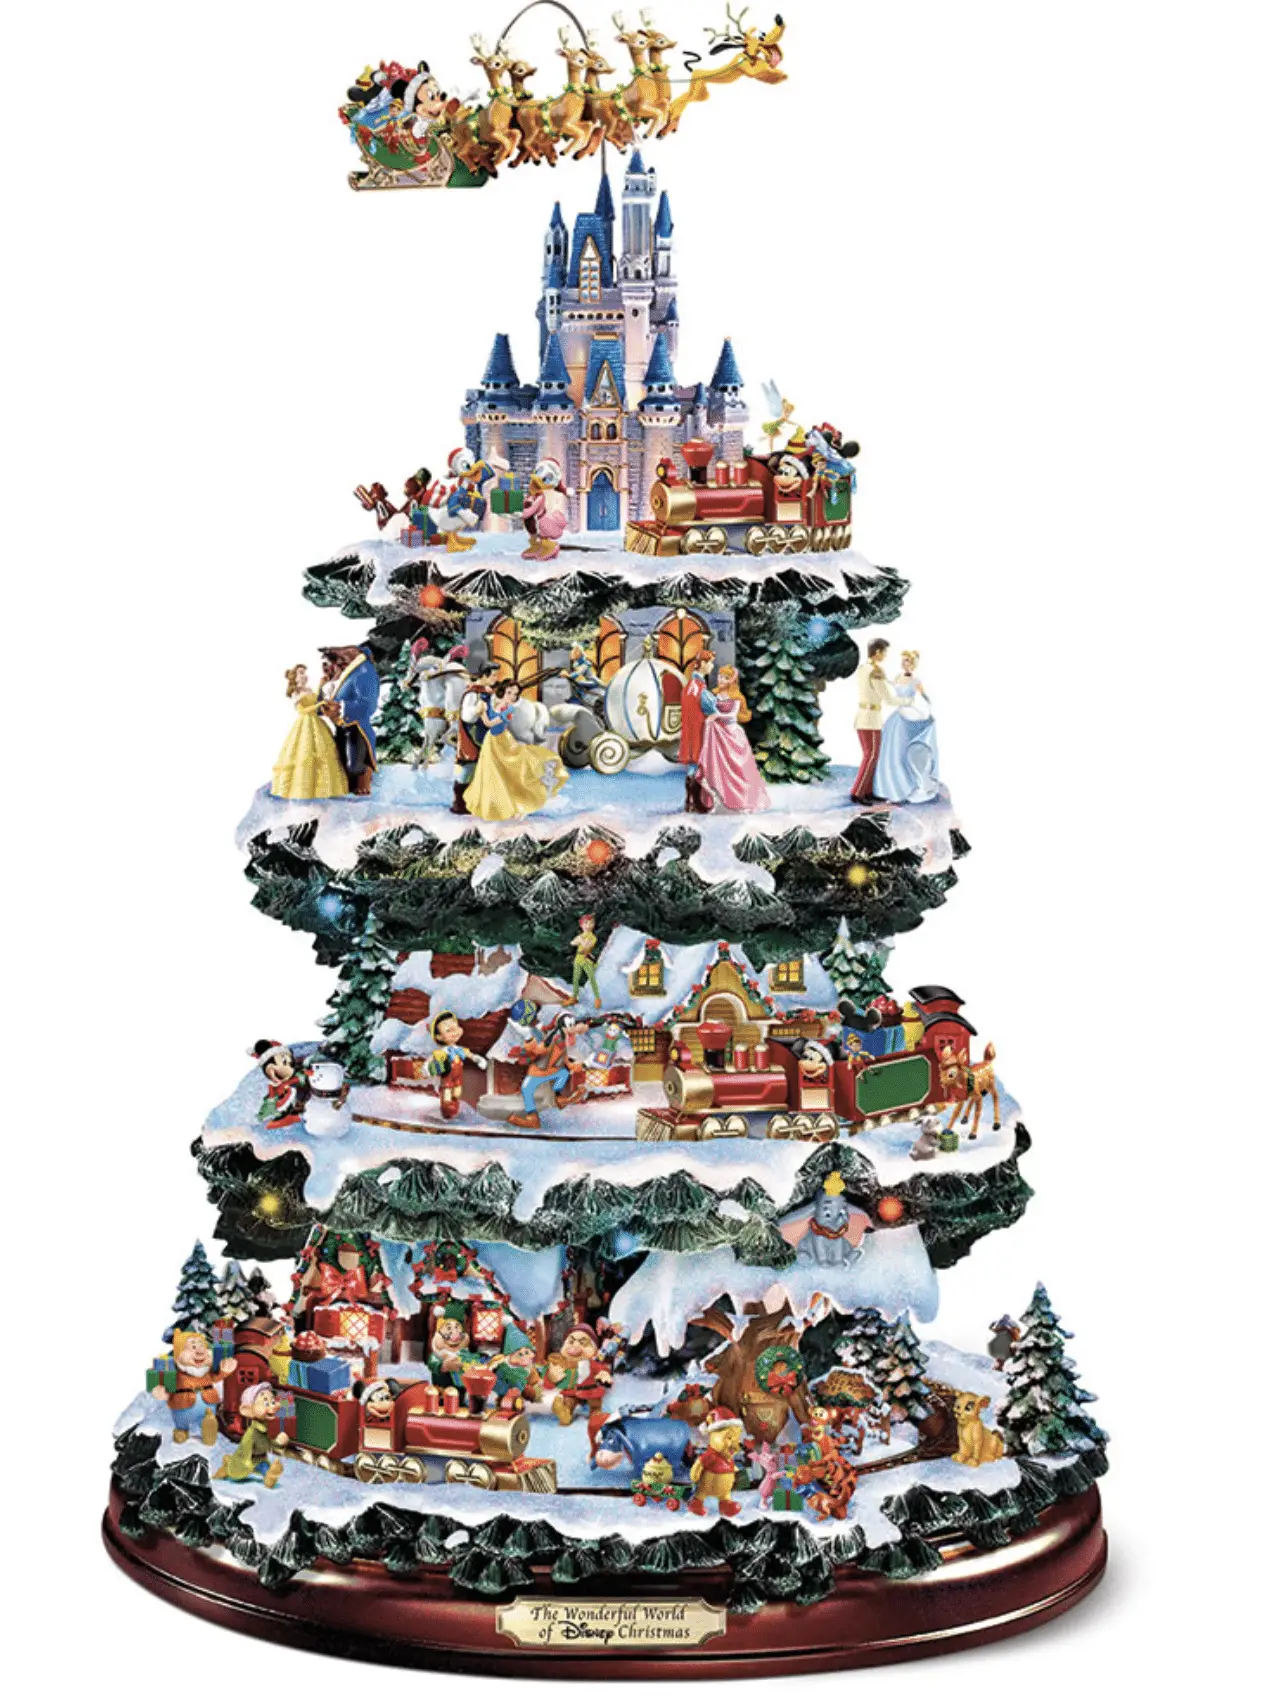 A Must-Have Disney Lover Christmas Carousel Tree